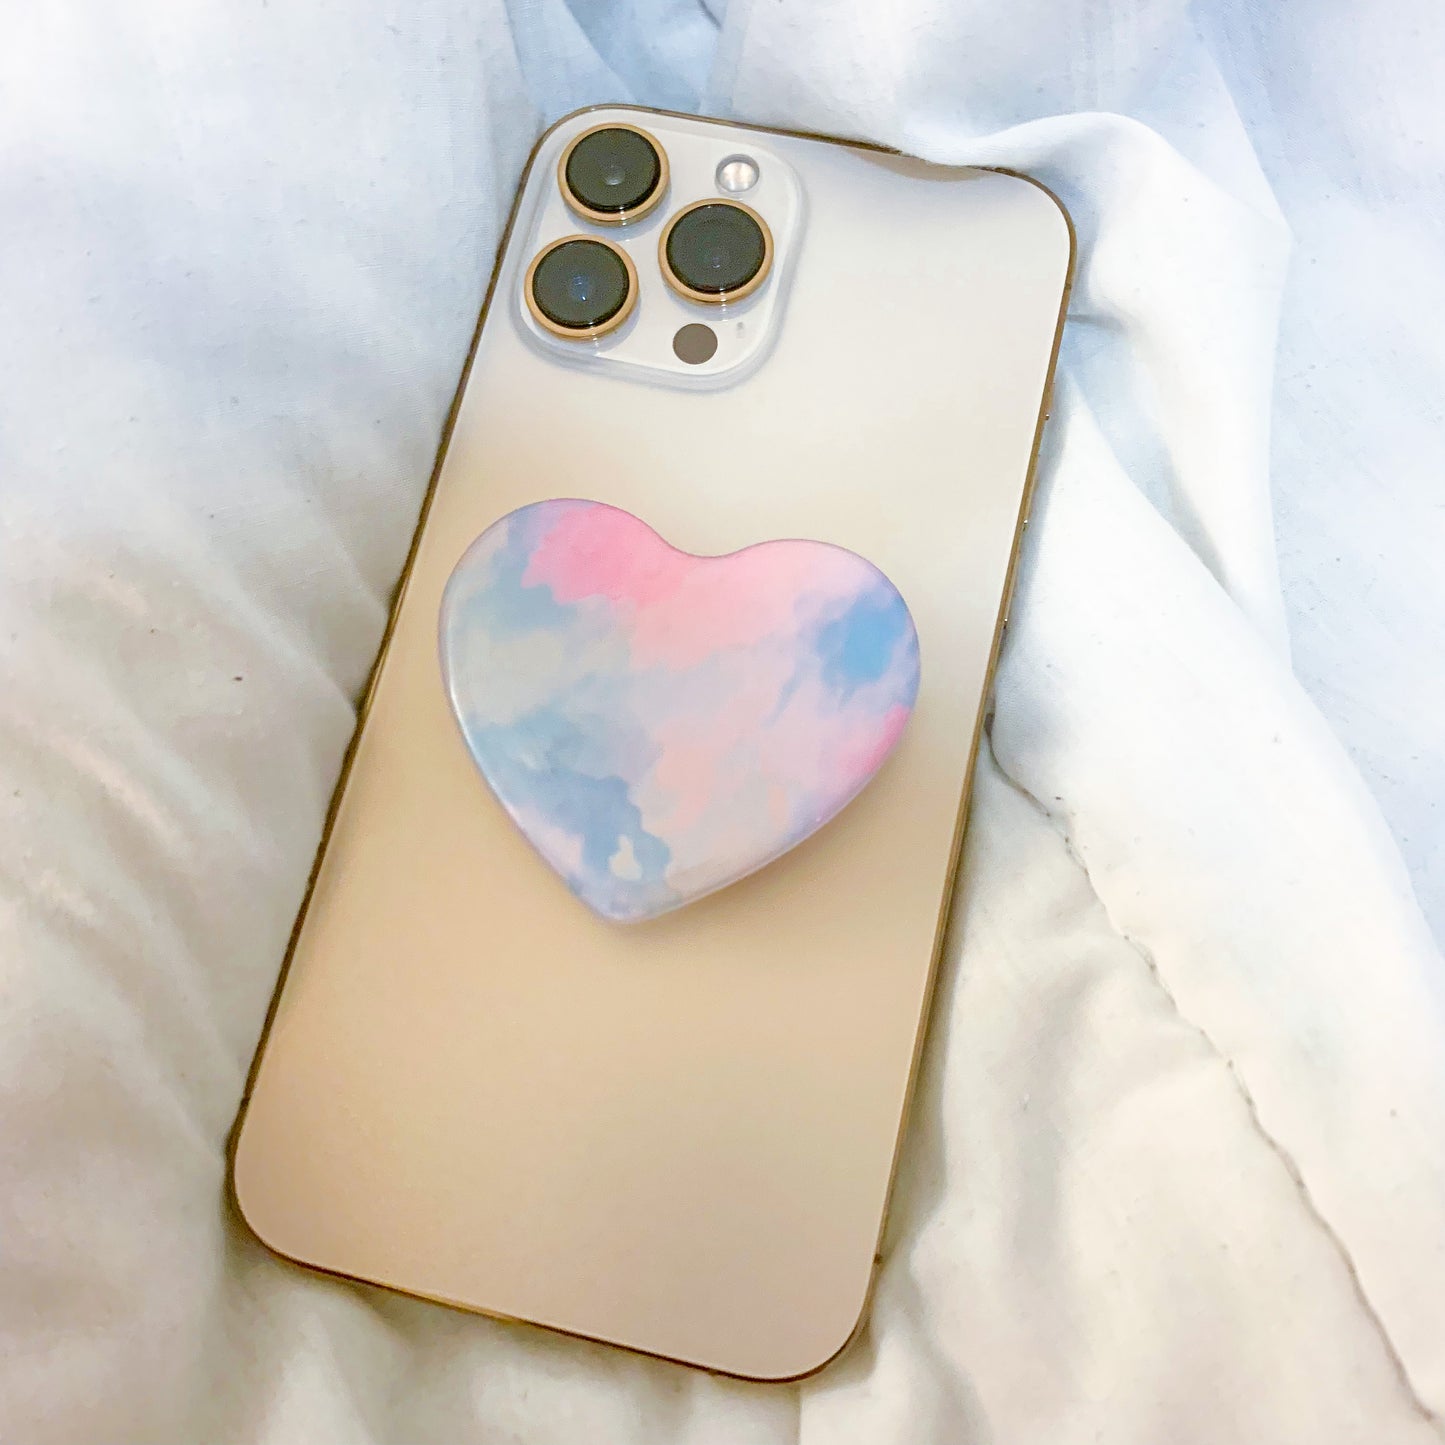 Blues & Pinks Watercolor Hearts Phone Grip